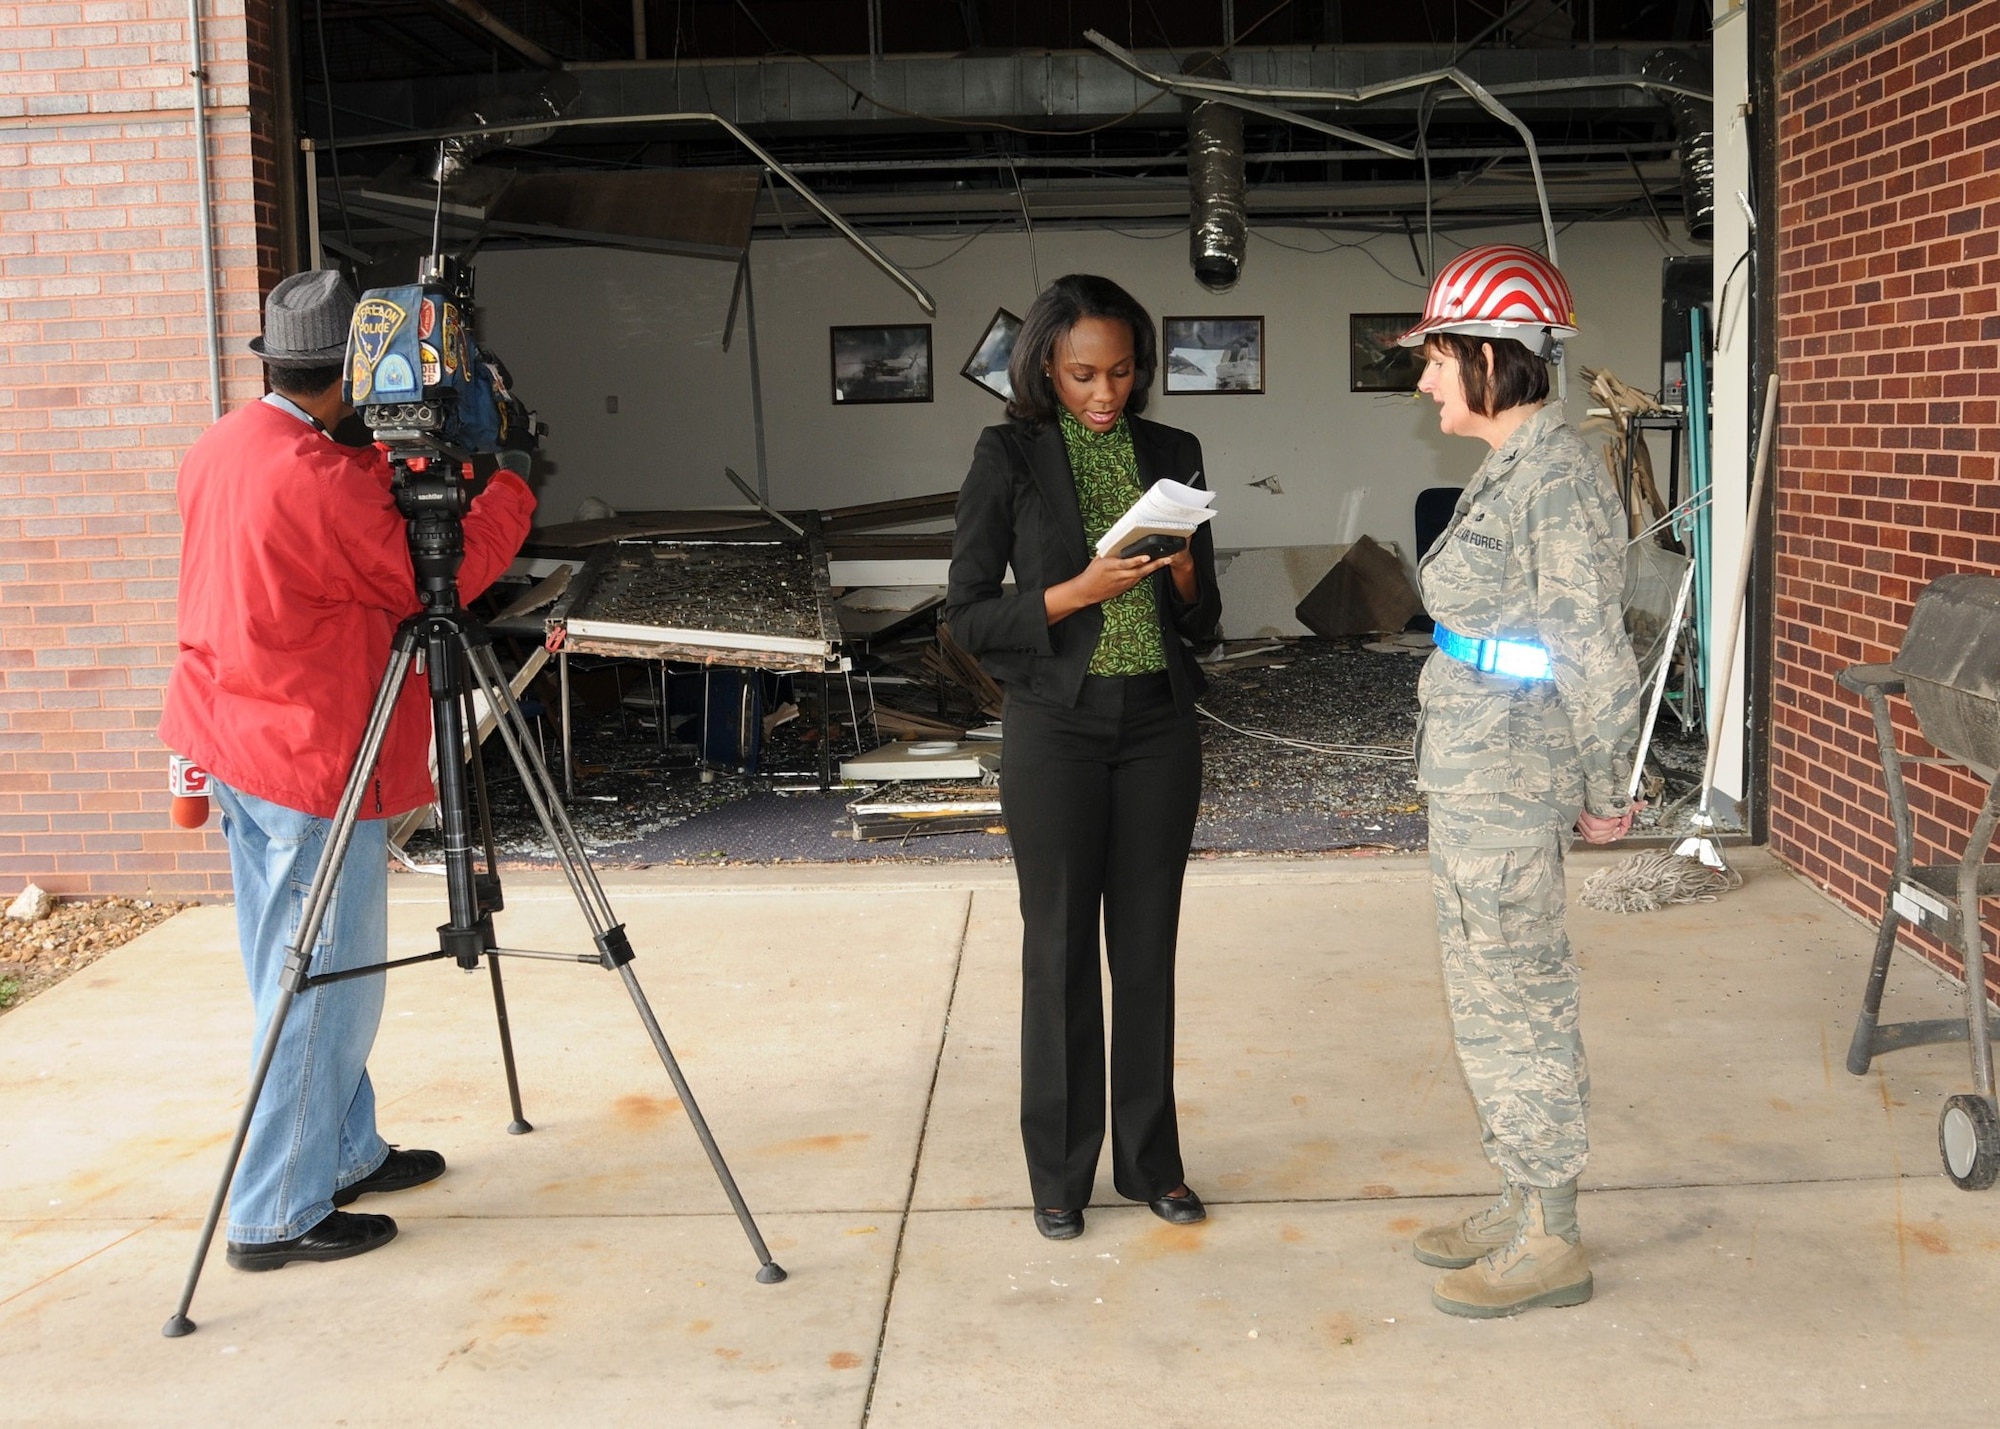 Colonel Kathleen Hancox, 131st Mission Support Group Commander and Emergency Operations Center Director, is interviewed by Ms. Courtney Gousman, a broadcast journalist with KSDK News Channel 5, regarding continued cleanup efforts at the 131st Bomb Wing Missouri Air National Guard Base at Lambert Field-Saint Louis, April 26.  A category EF4 tornado swept across the Base, April 22. No injuries were reported to Air National Guard personnel, but there was widespread damage across the south-side of the base. Estimates for repair to the base could top 10 million U.S. dollars.  Cleanup efforts at the base are ongoing. (Photo by Master Sgt. Mary-Dale Amison)